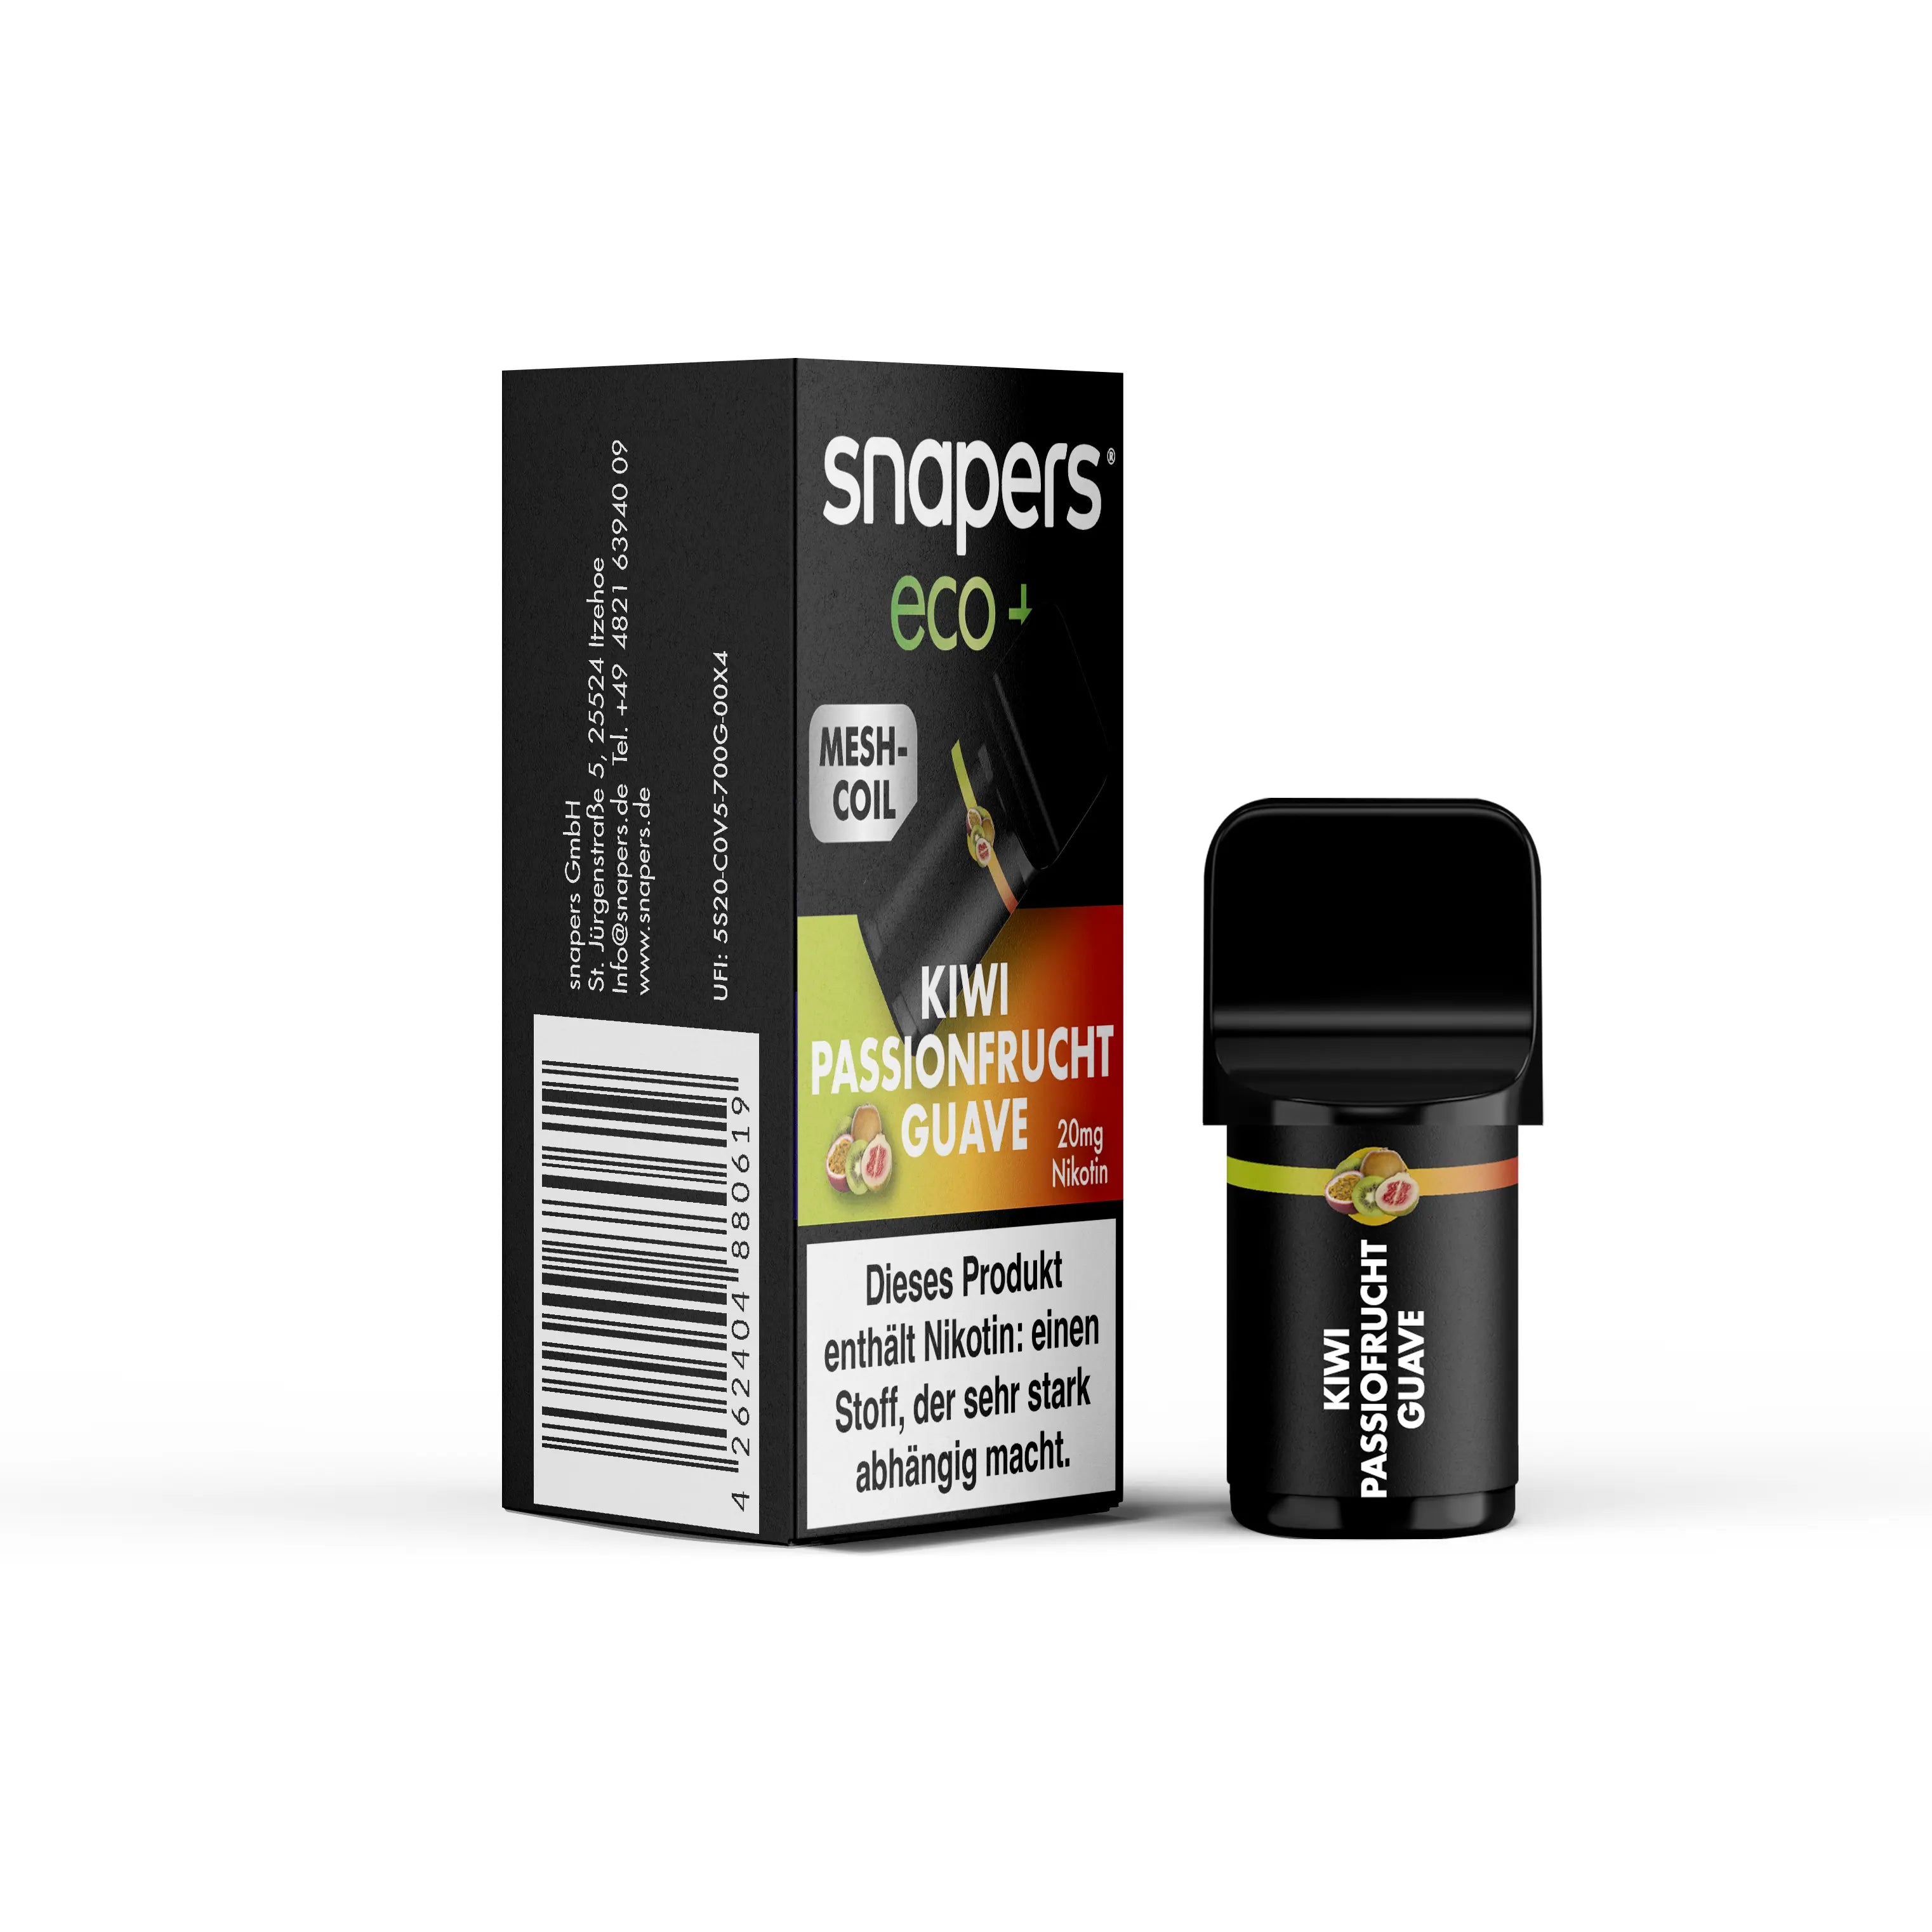 Snapers Eco+ 800 - Kiwi Passionsfrucht Guave